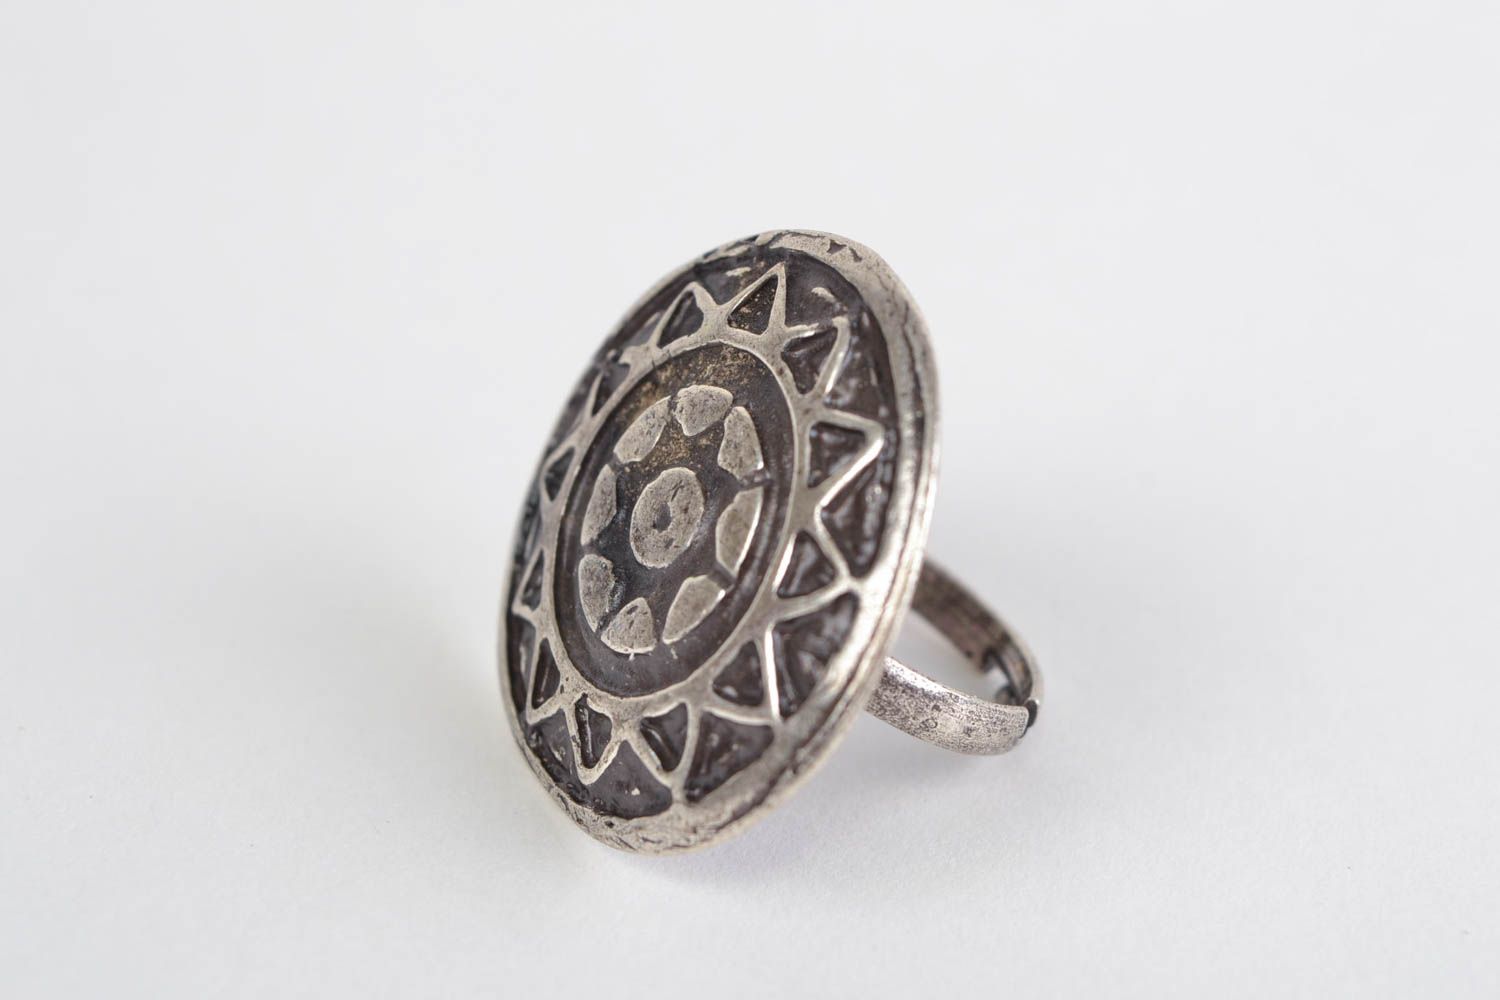 Handmade round jewelry ring cast of copper aluminum zinc alloy in ethnic style photo 2